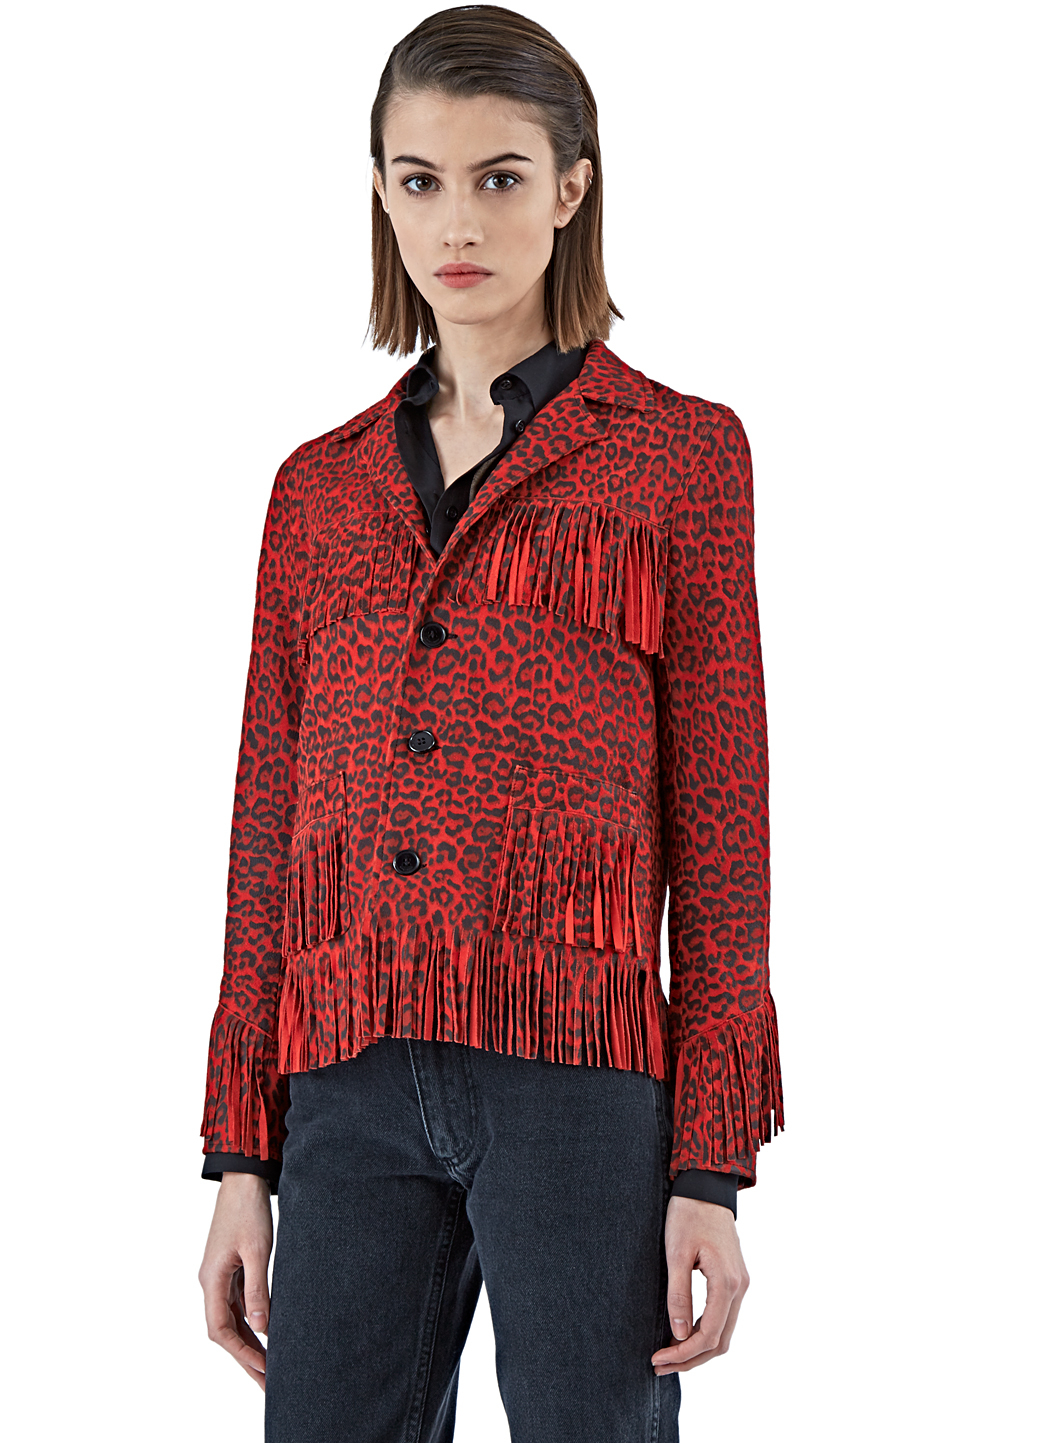 Saint laurent Leopard-Print Fringed Suede Jacket in Red | Lyst